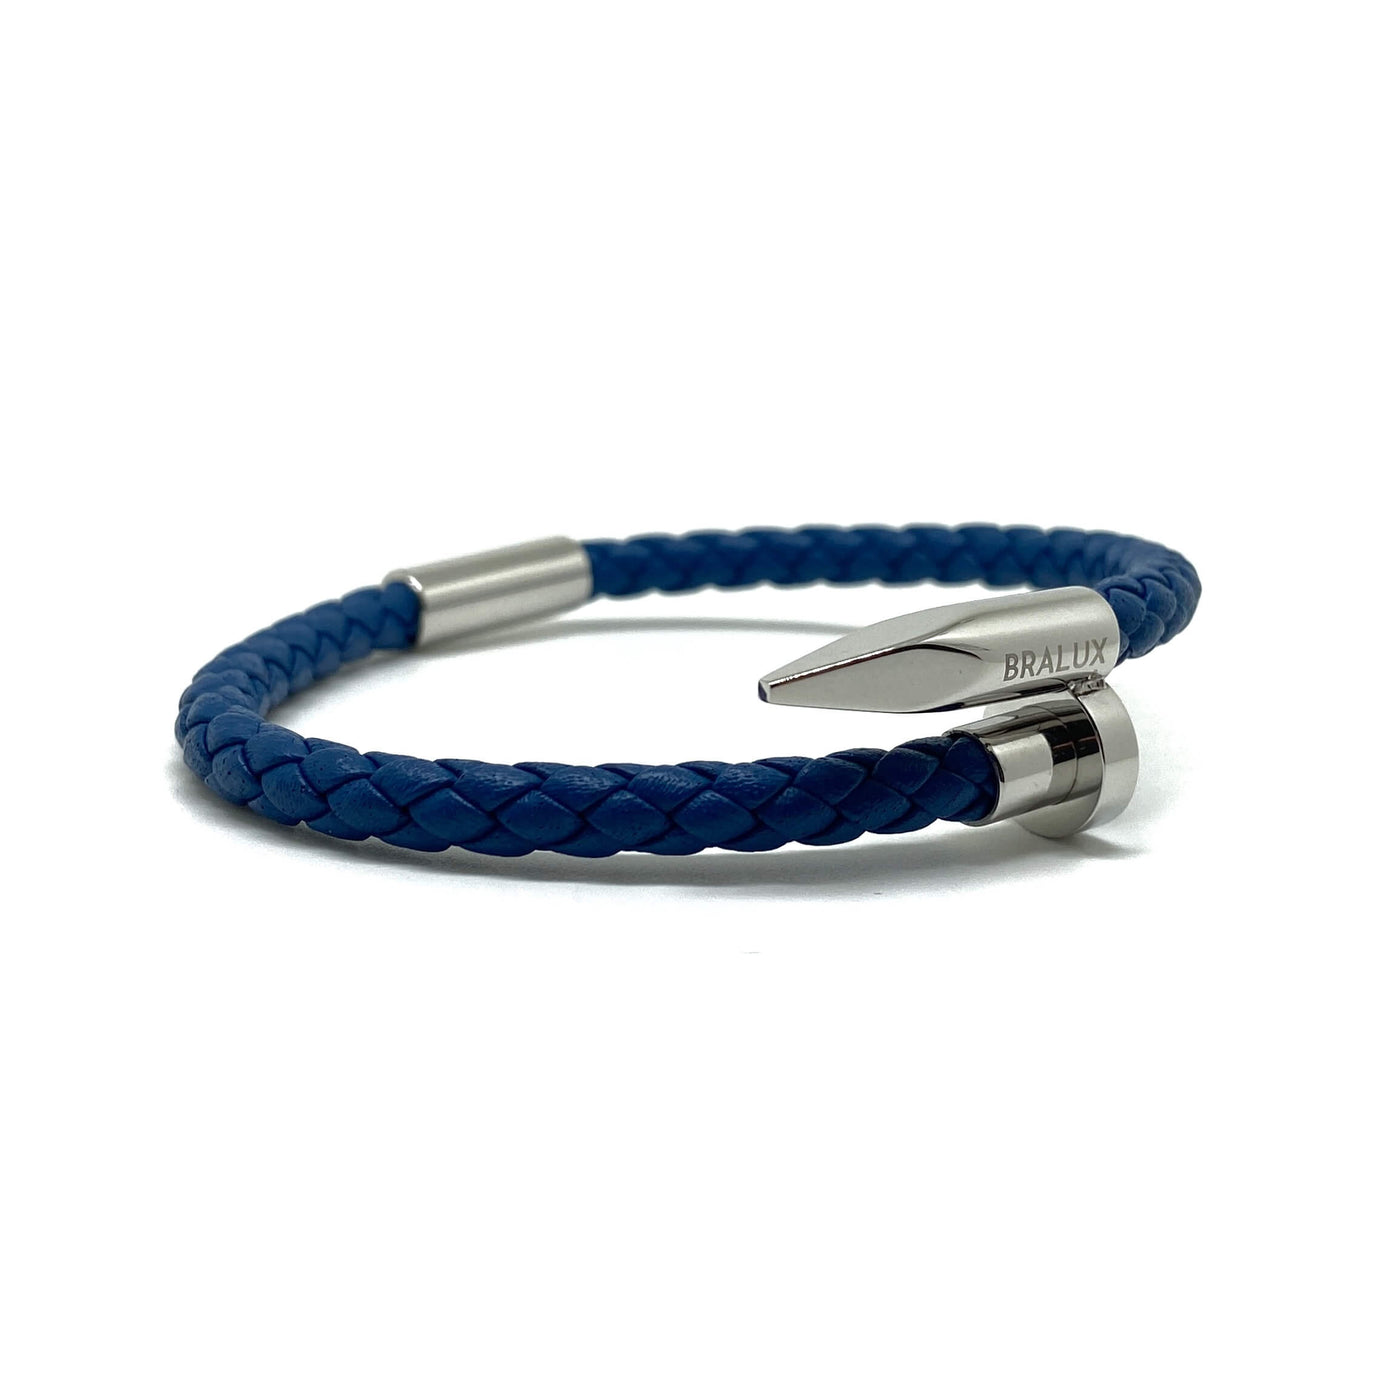 The Dark Blue And Silver Nail Leather Bracelet